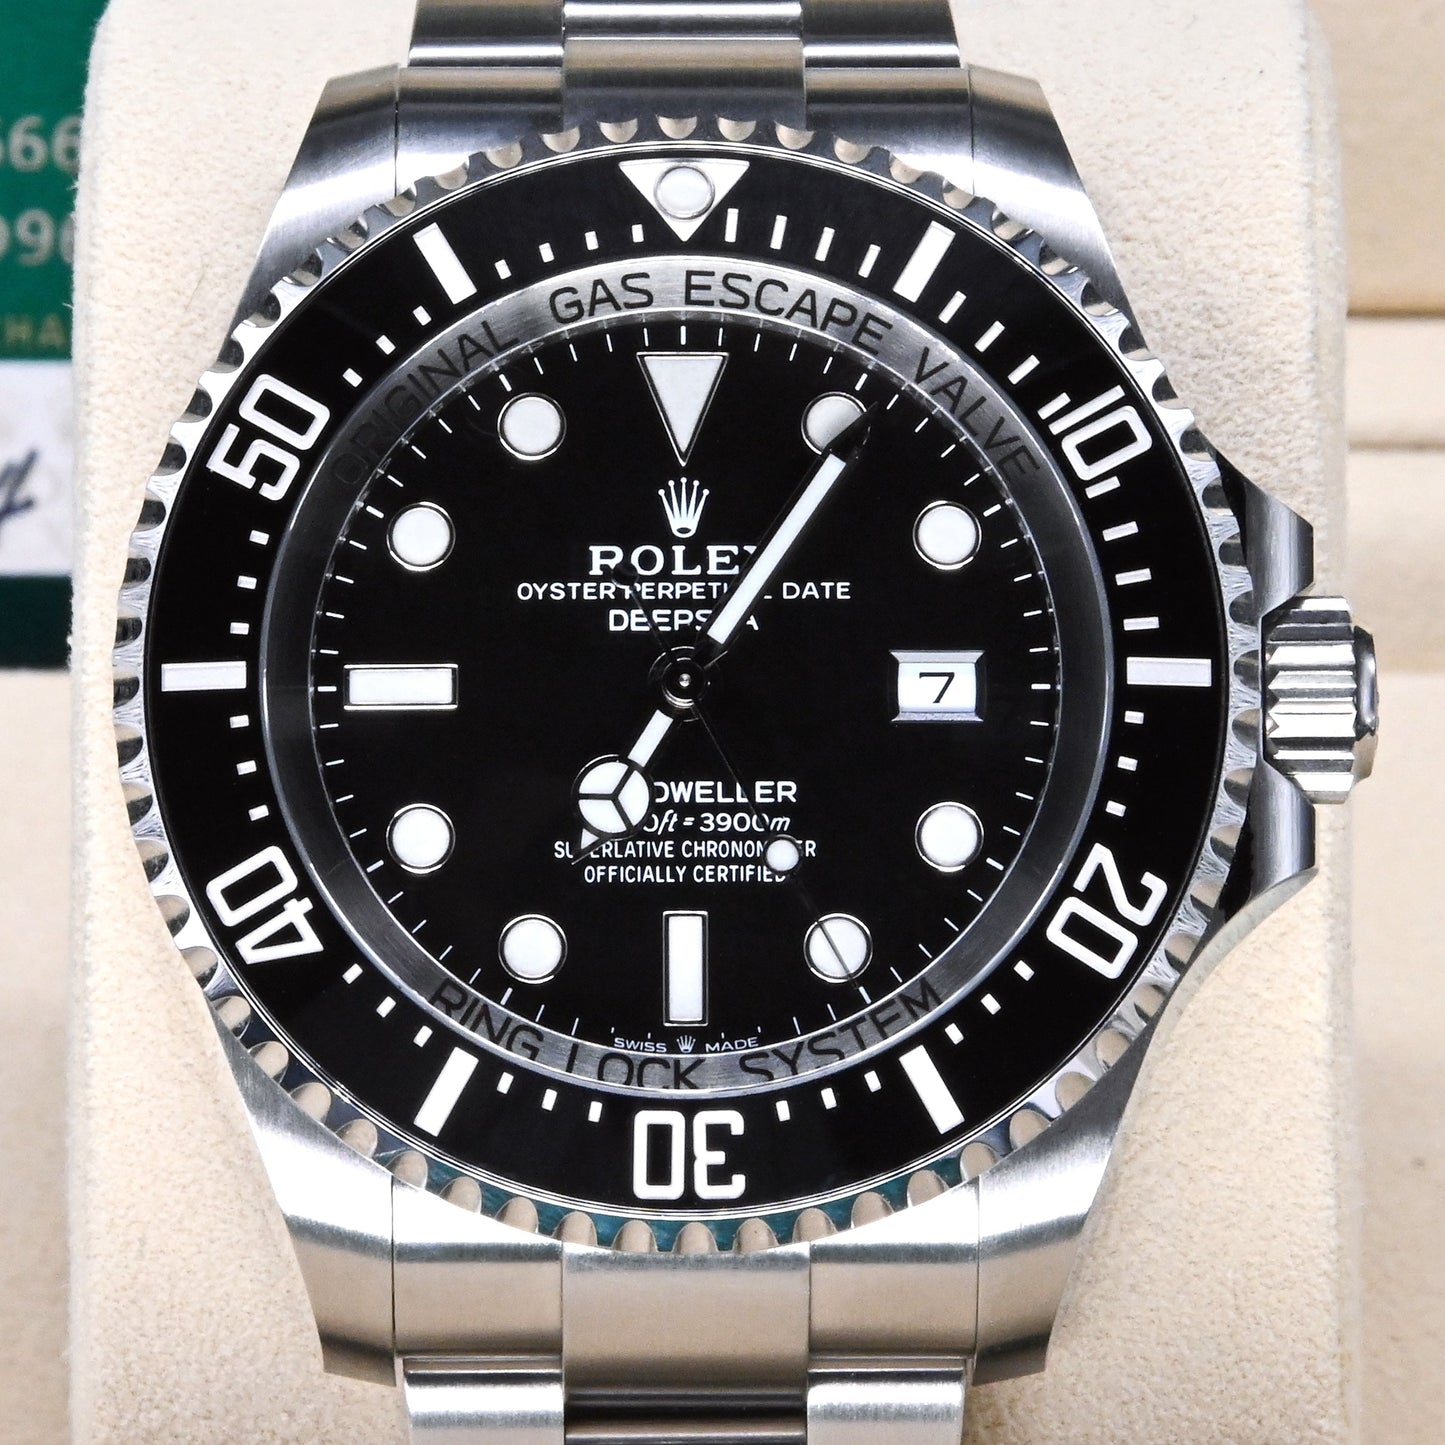 [New Old Stock] Rolex Deepsea 44mm 126660 Black Dial